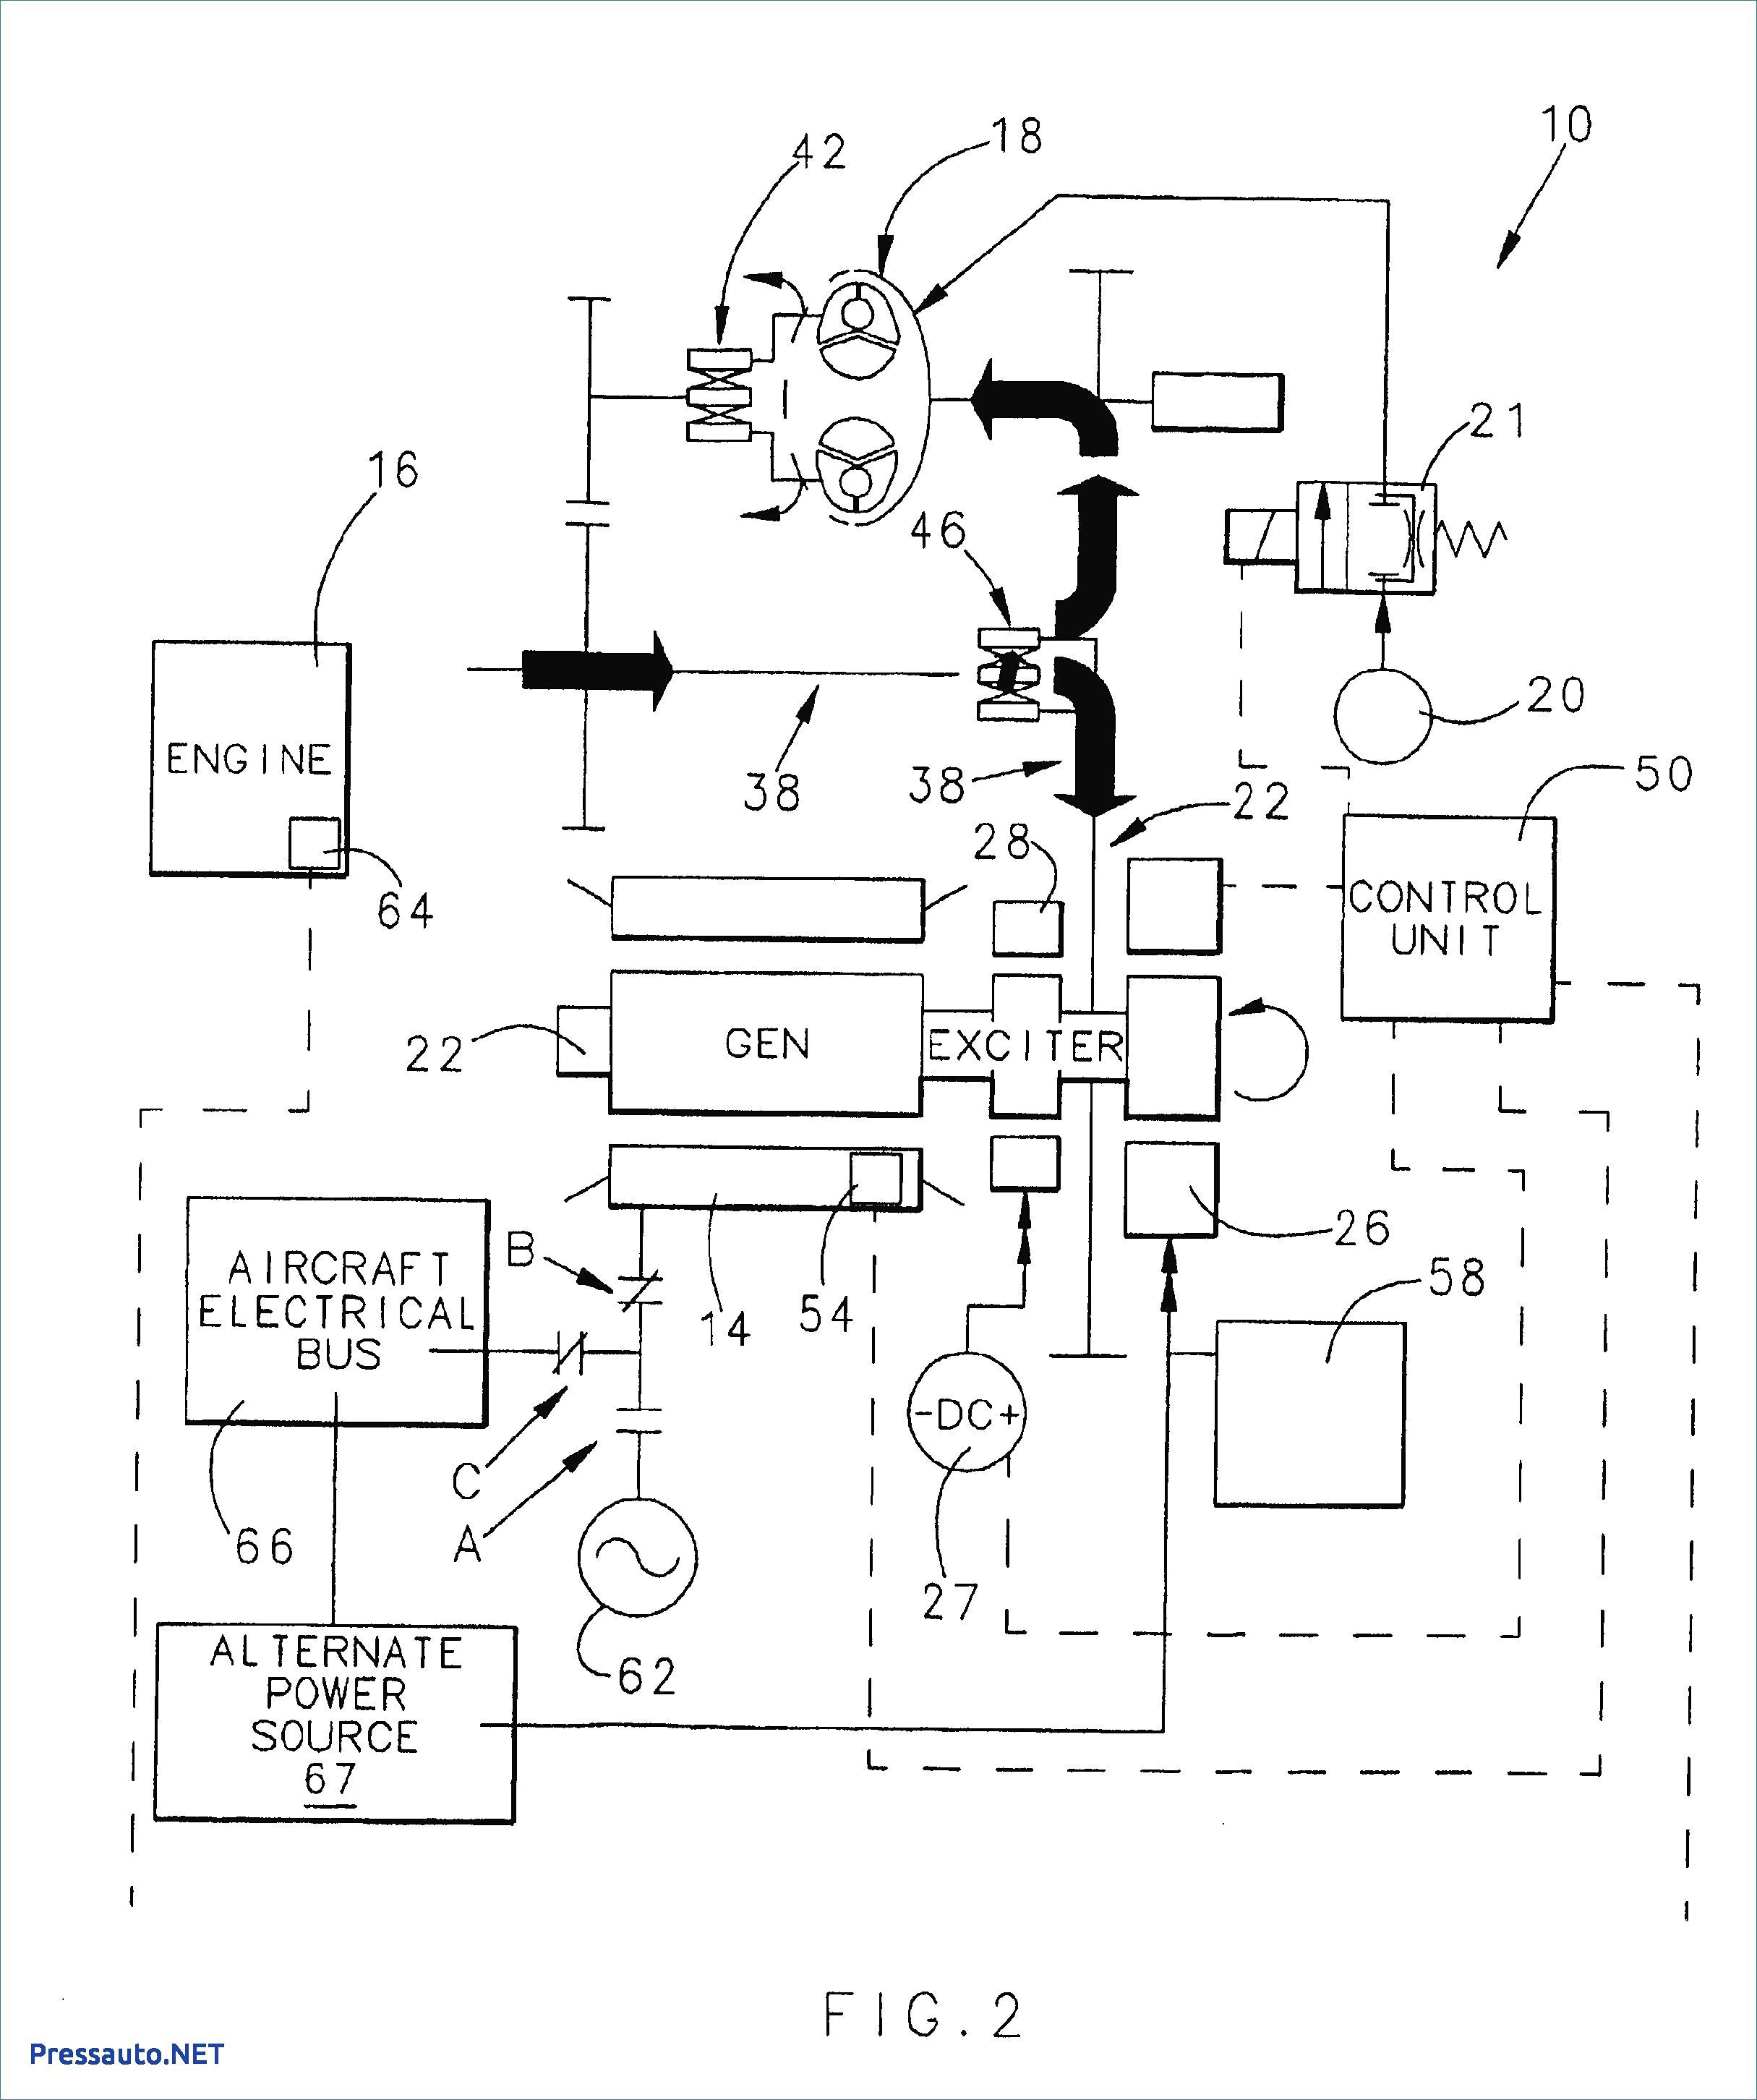 2002 ford Explorer V8 Engine Diagram 2002 ford Galaxy Dachtr Ger Montageanleitung Archives Simple Of 2002 ford Explorer V8 Engine Diagram